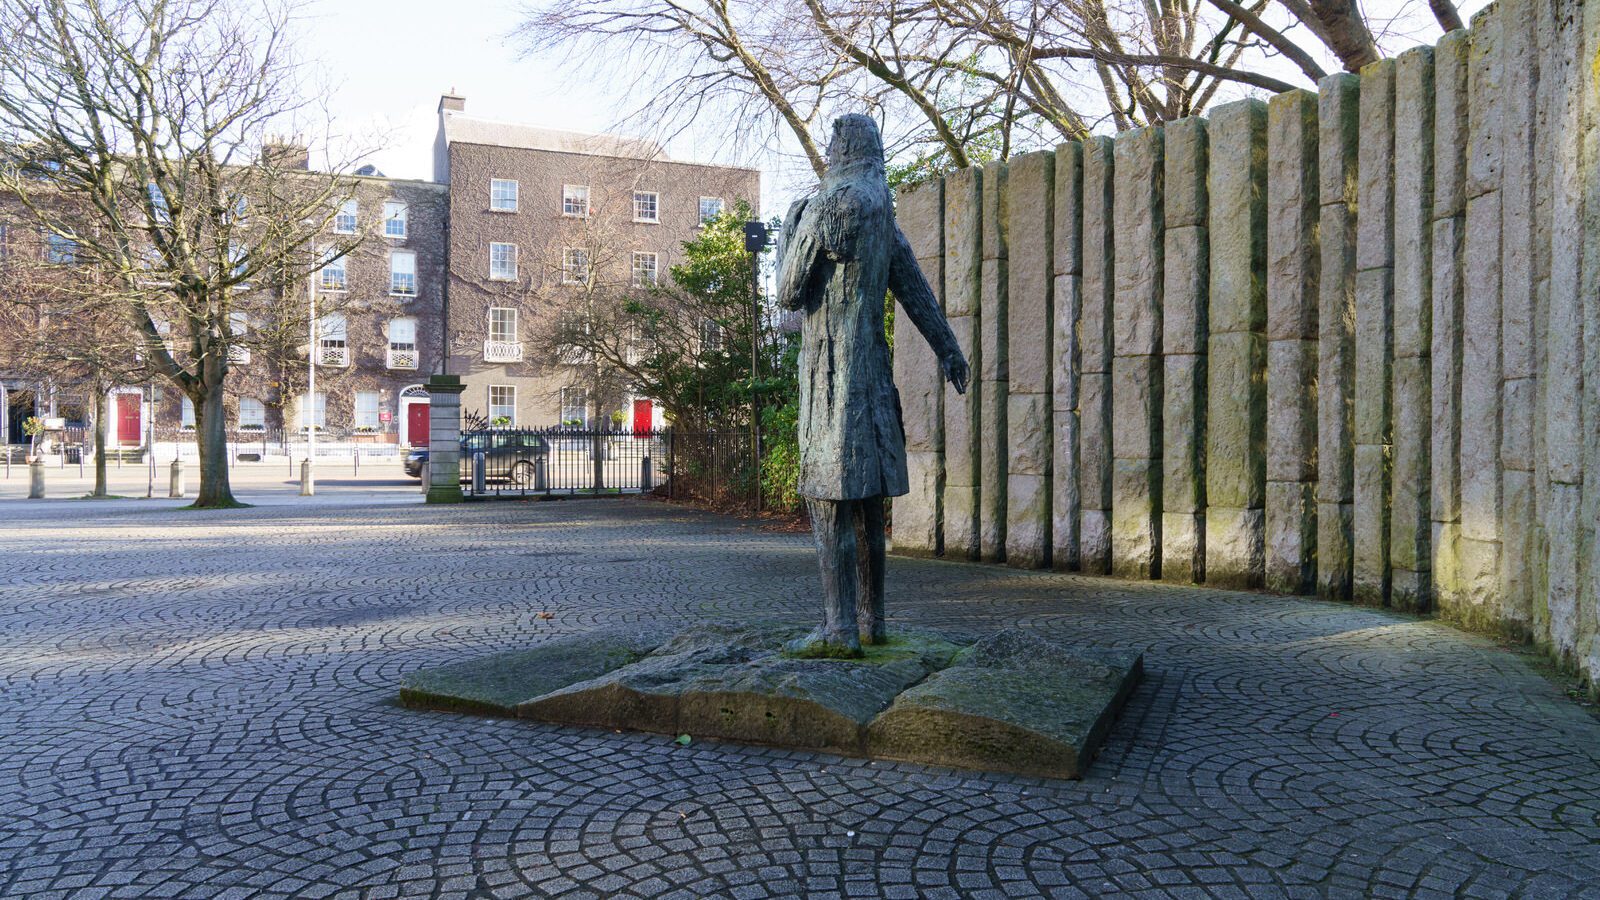 WOLFE TONE BY EDWARD DELANEY [I LIKE THE SETTING AT THE CORNER OF STEPHEN'S GREEN]-228105-1